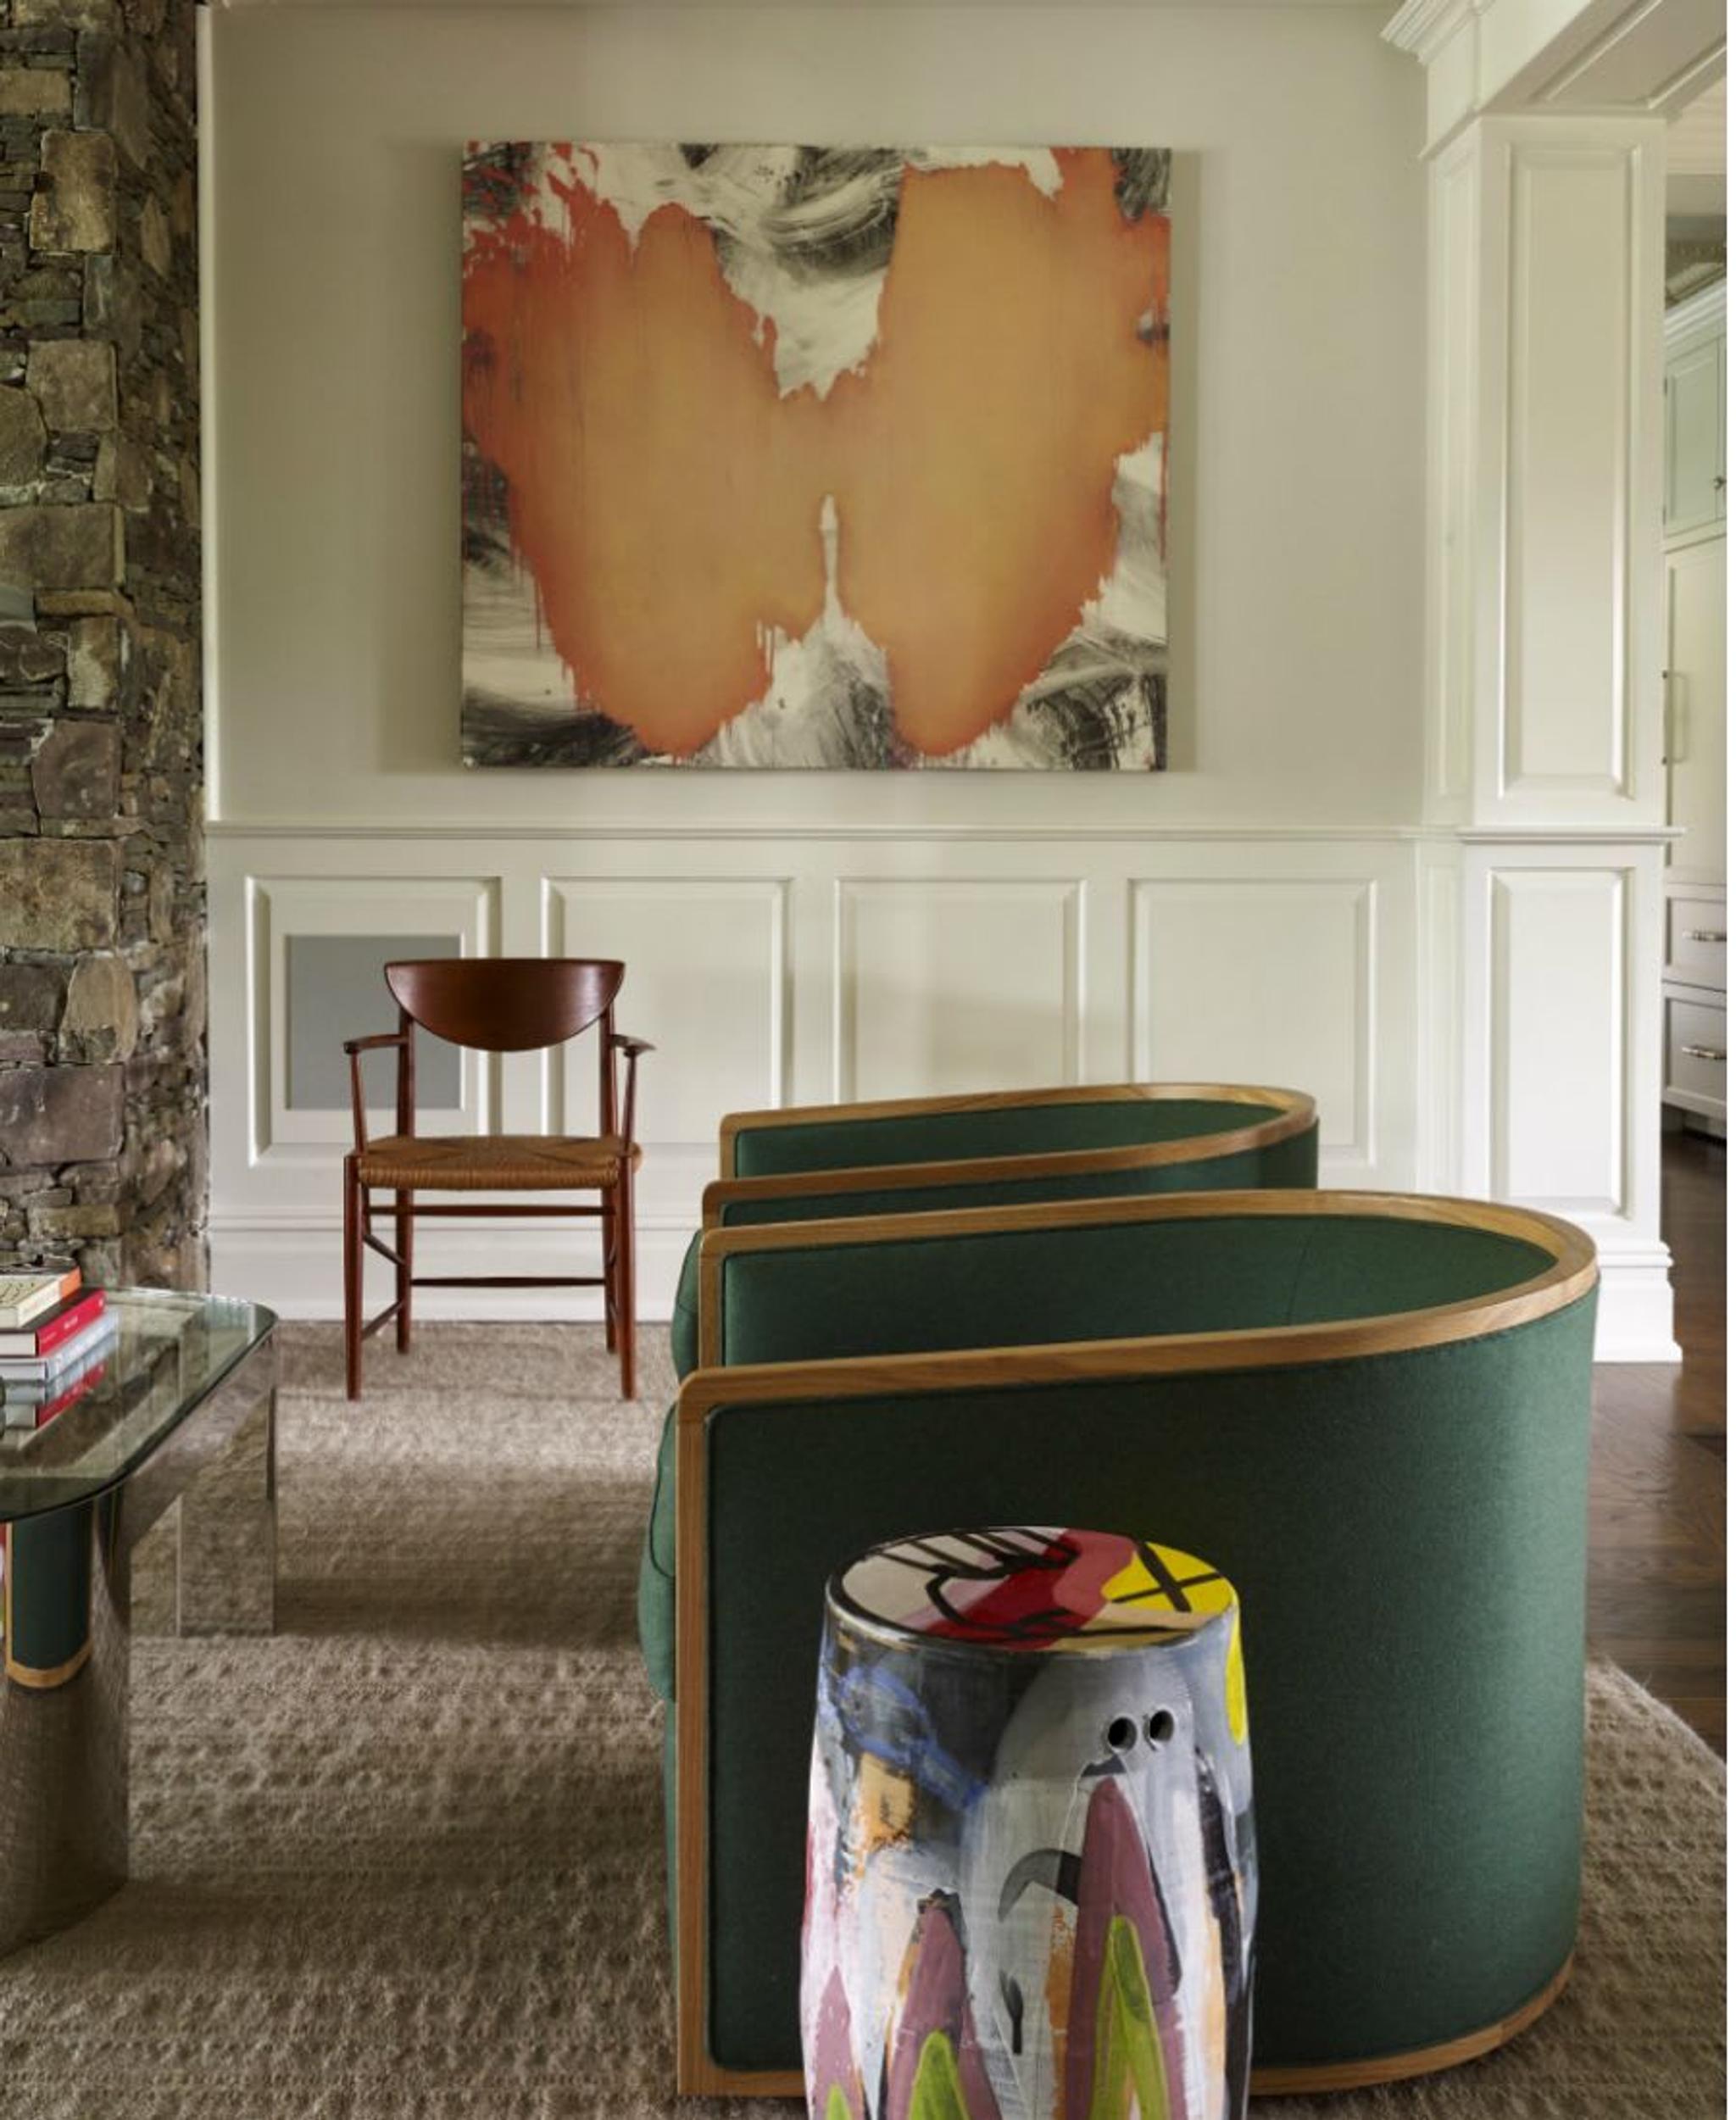 Decorating with art according to New York based designer Timothy Brown